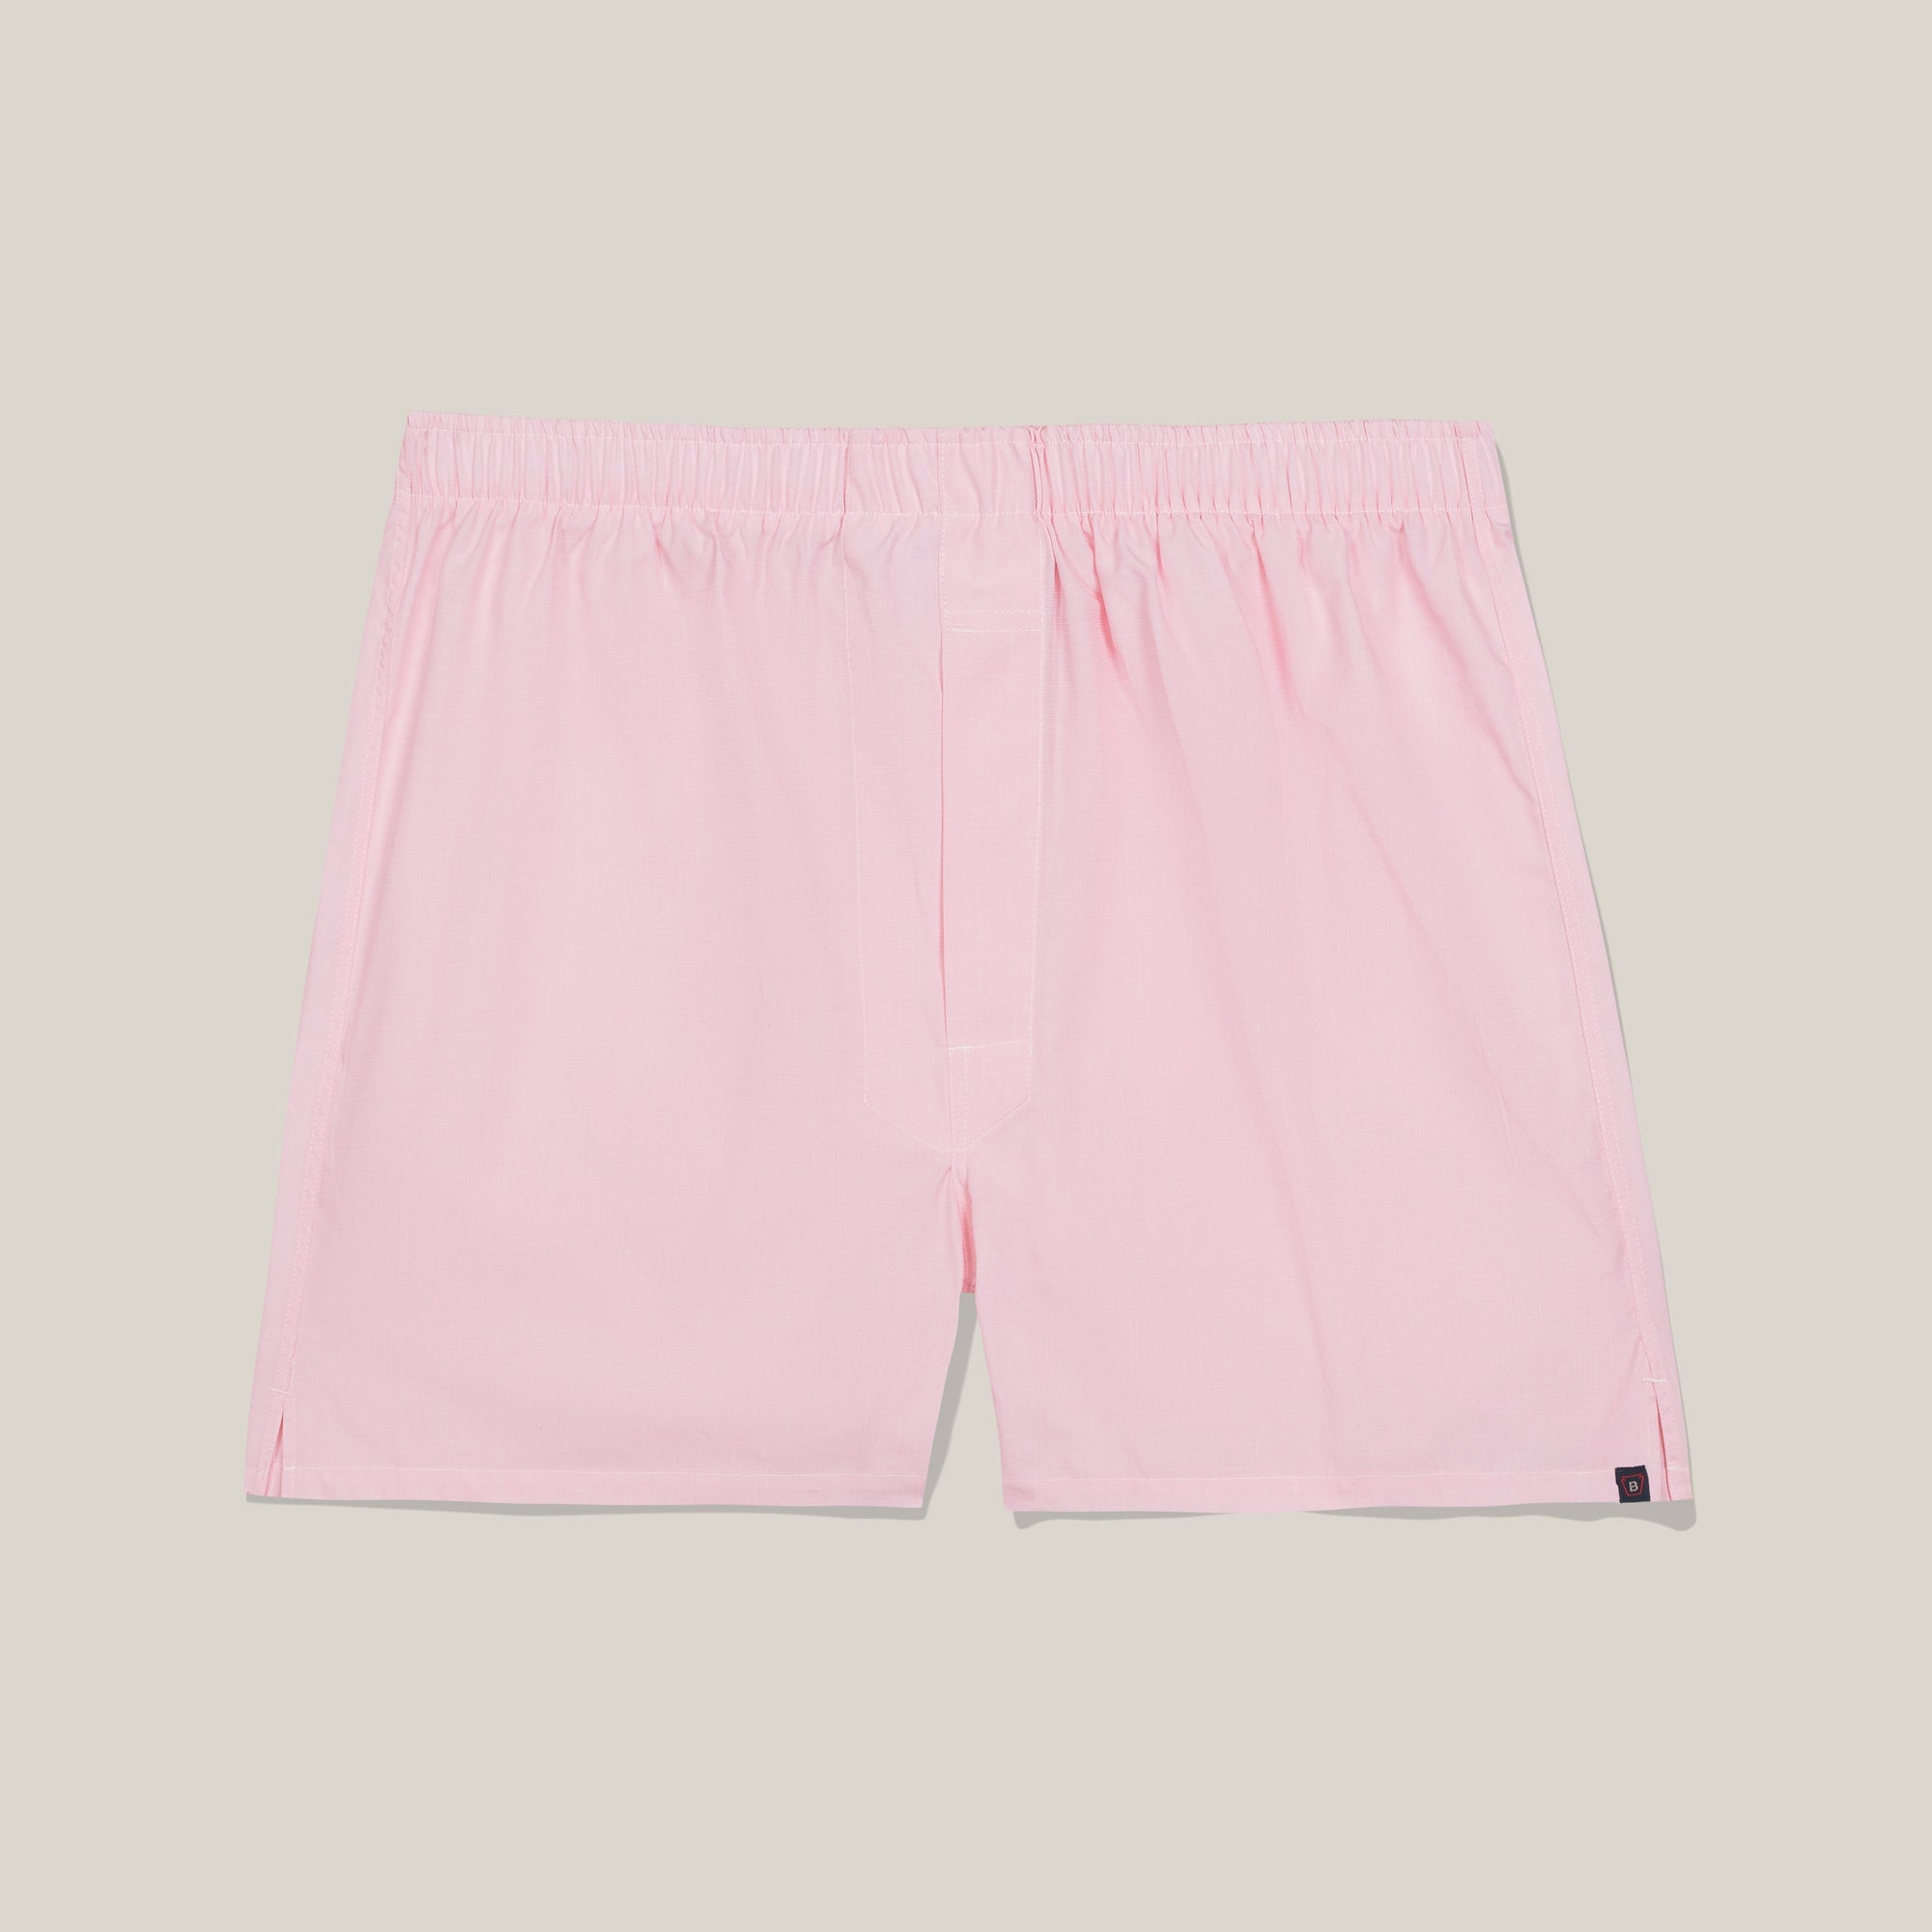 Solid Cotton Poplin Boxer in Pink by Bills Khakis